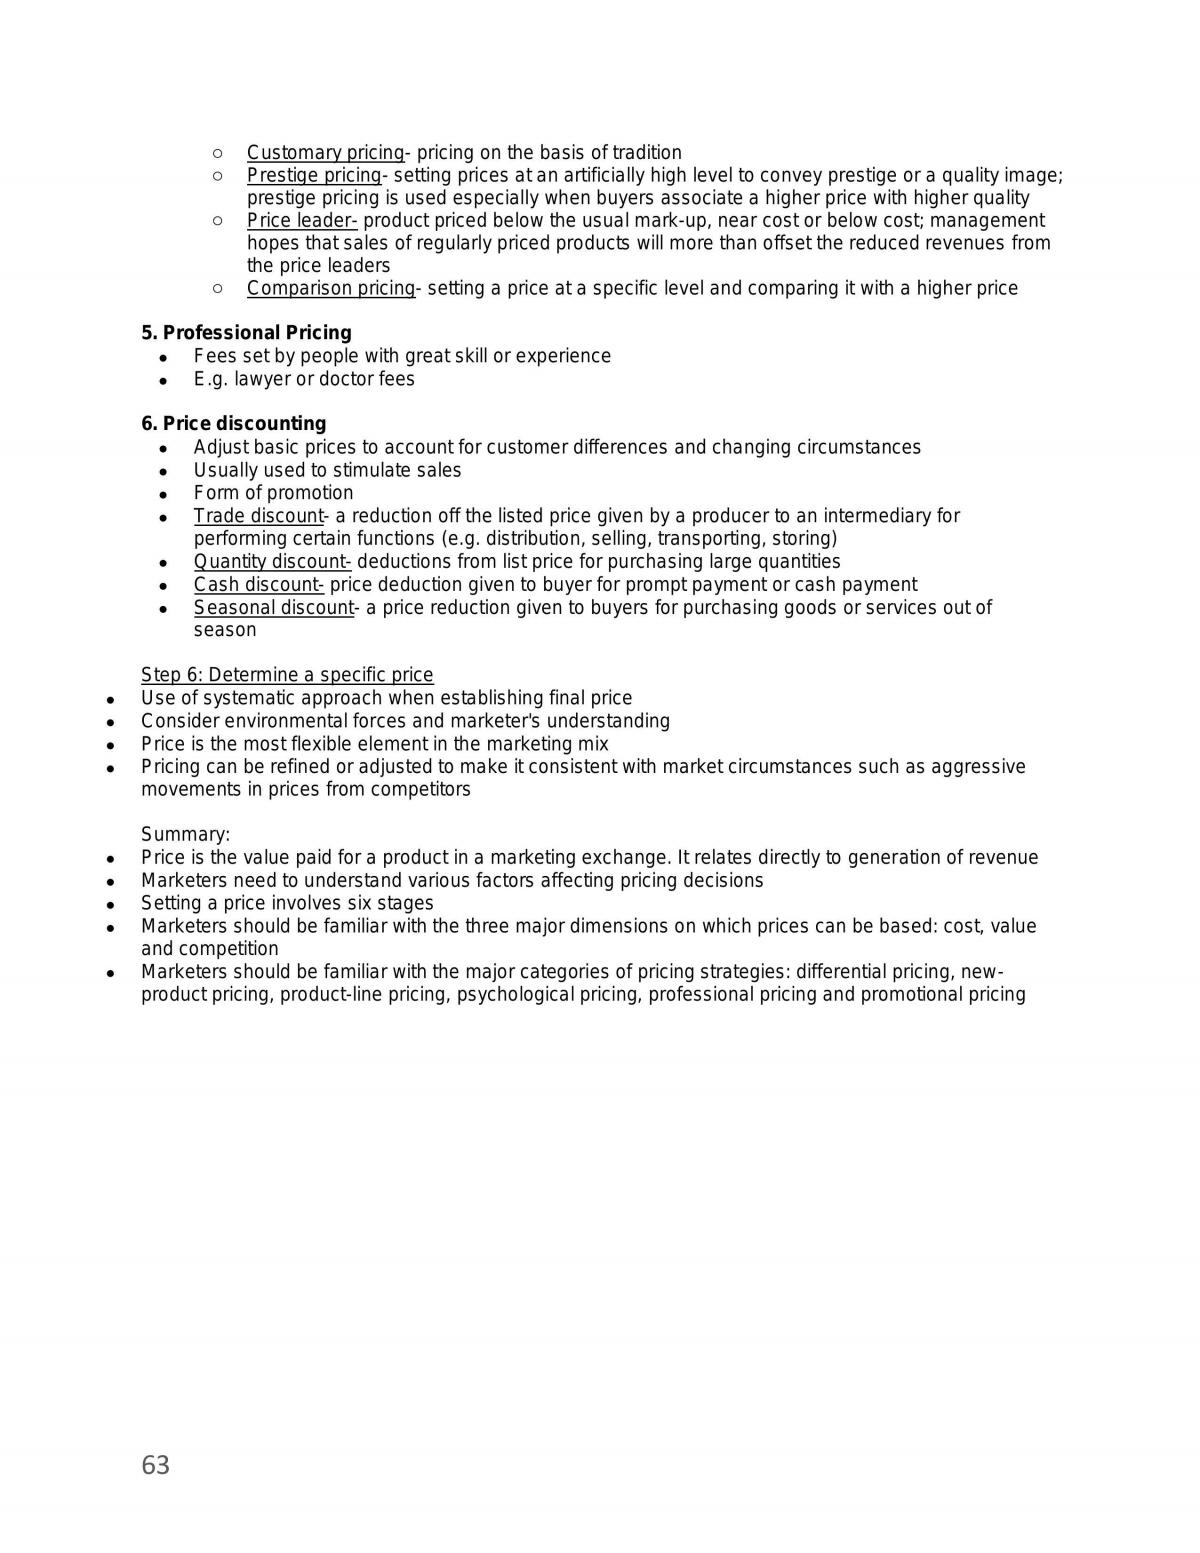 MKC1200 Comprehensive Topic Notes - Page 63